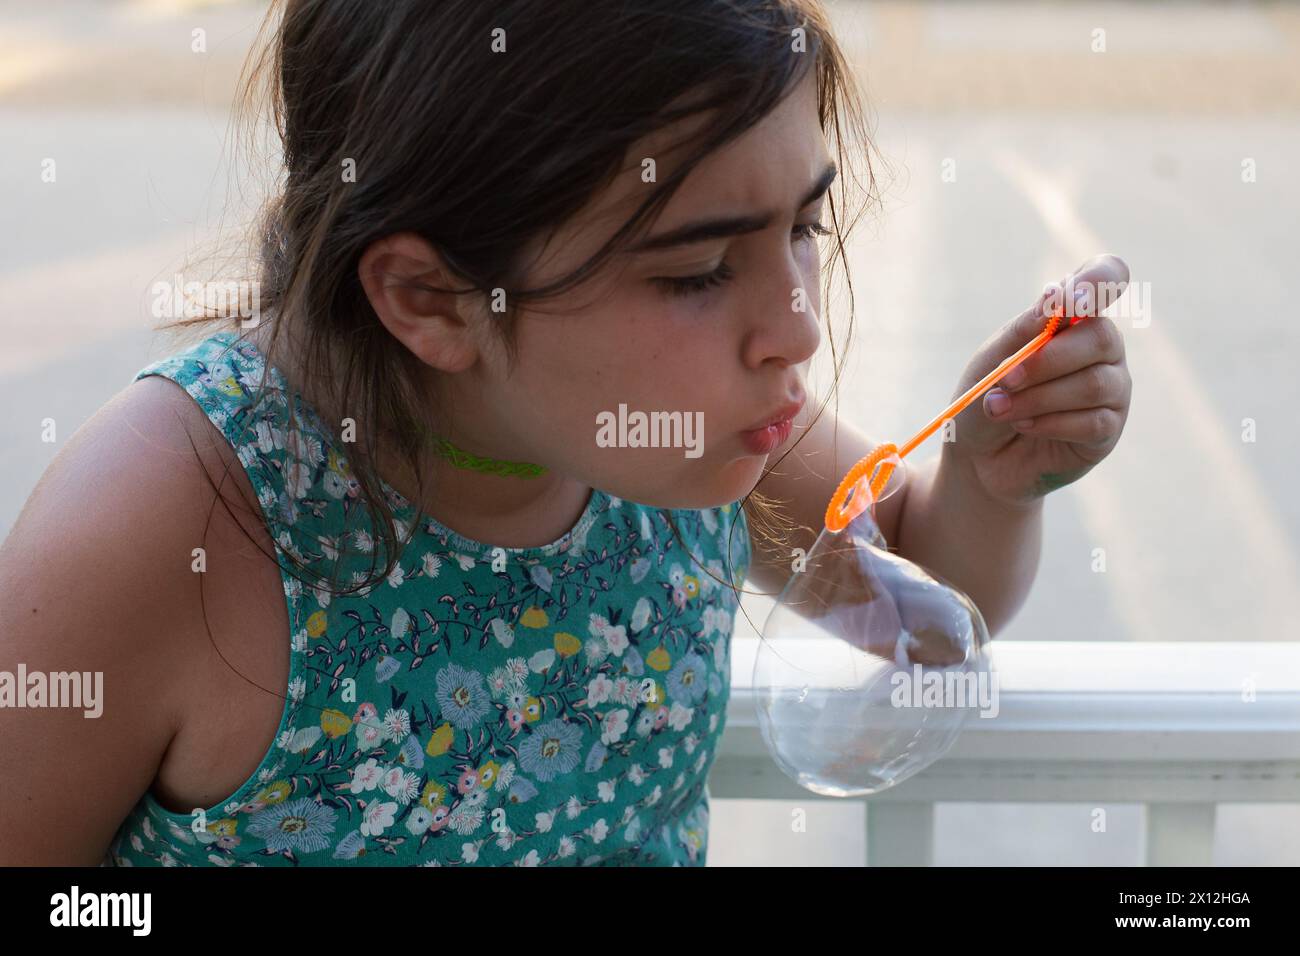 Girl with brown hair blowing bubbles Stock Photo